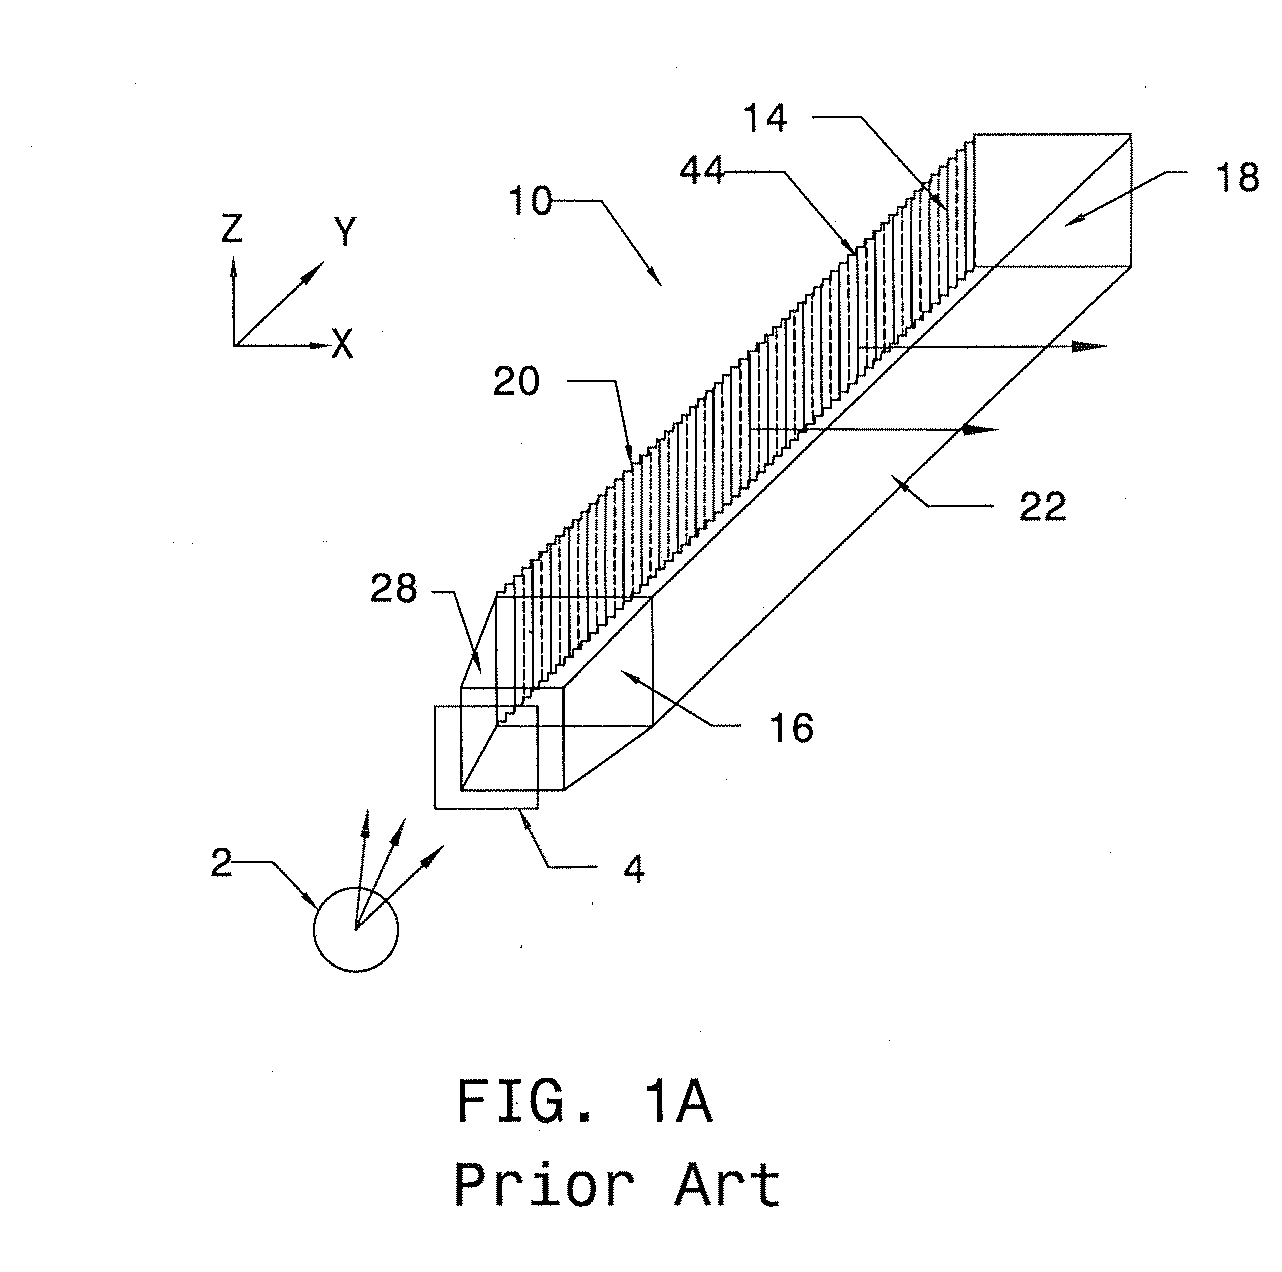 Light expanding system for producing a planar light beam from point light sources